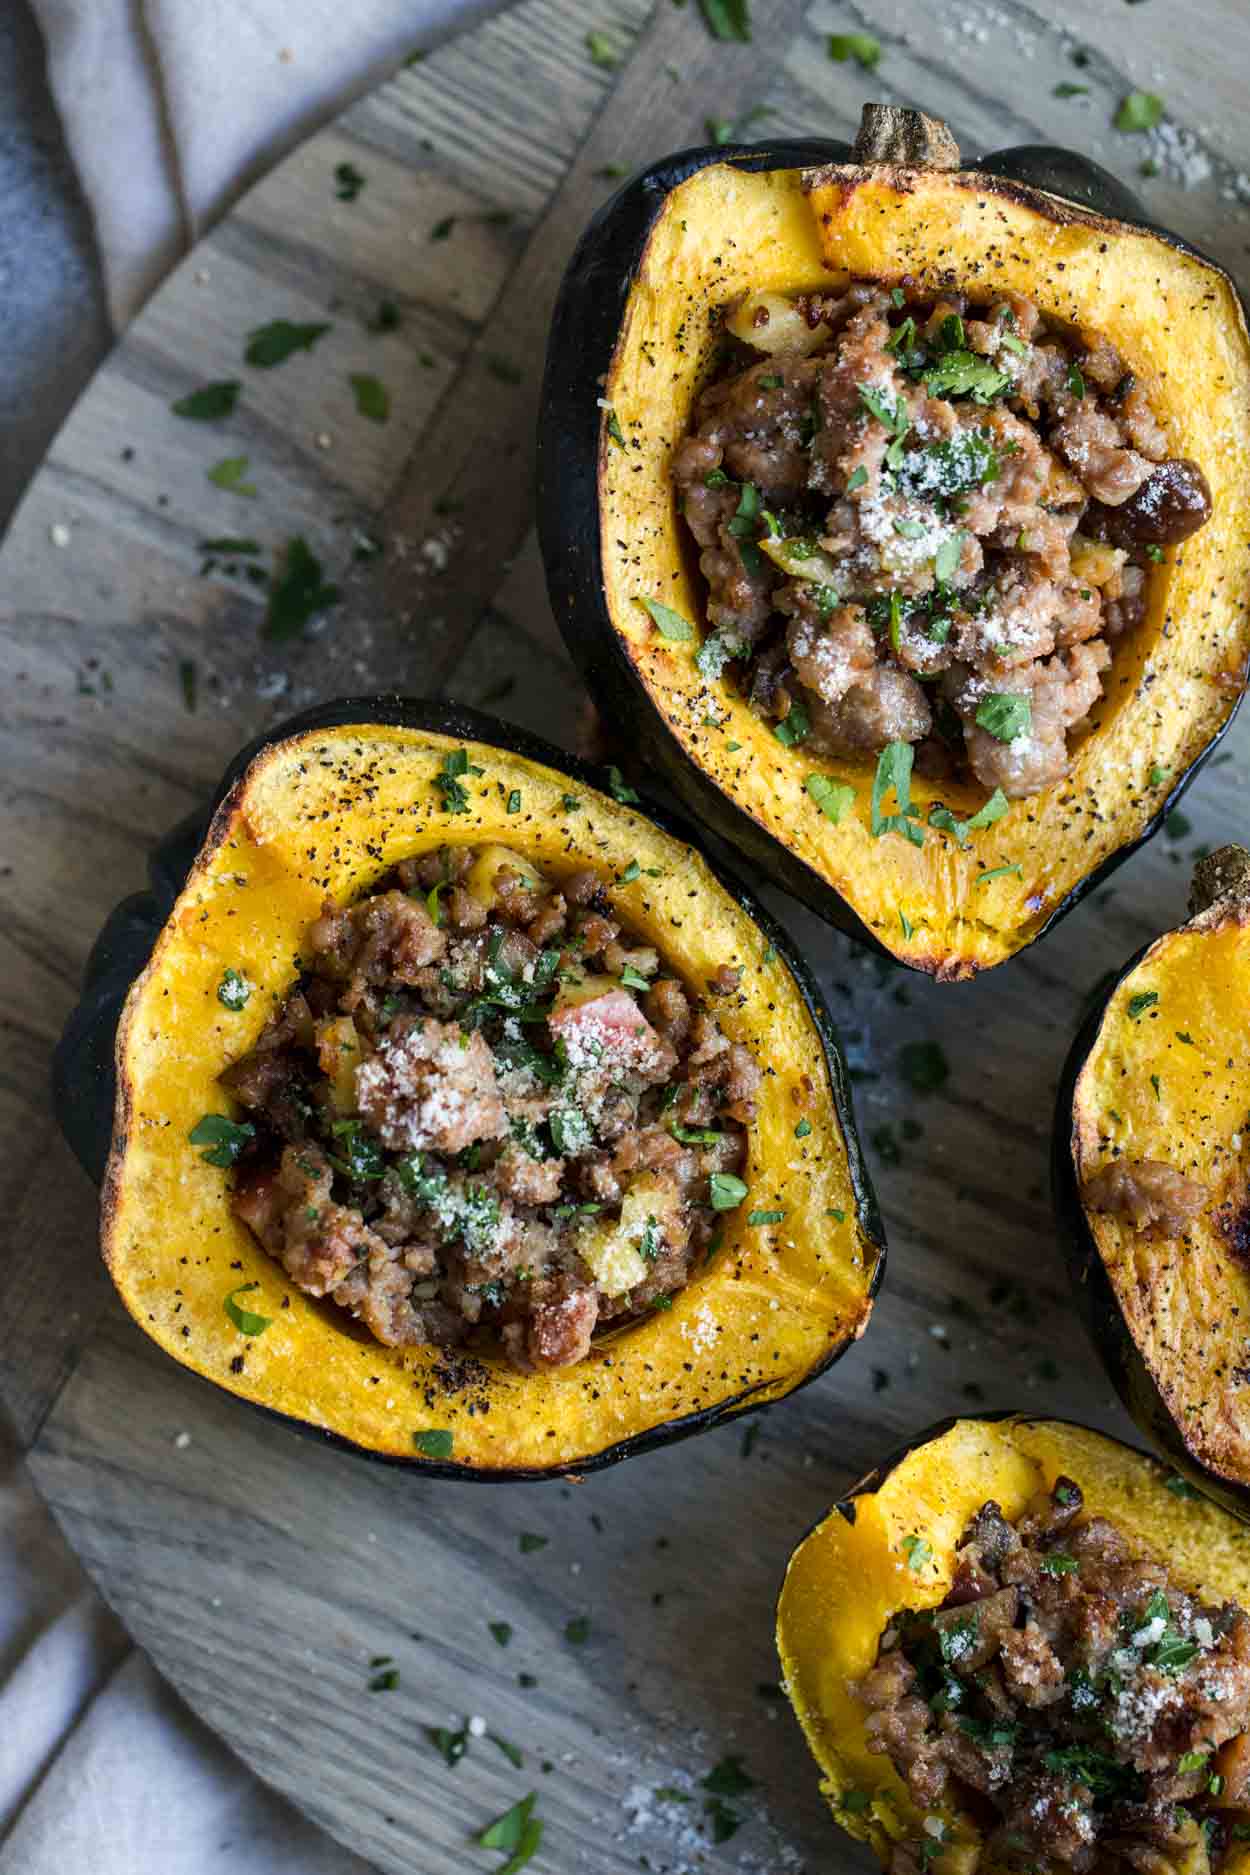 Roasted acorn squash with pork sausage and apple and chestnut stuffing